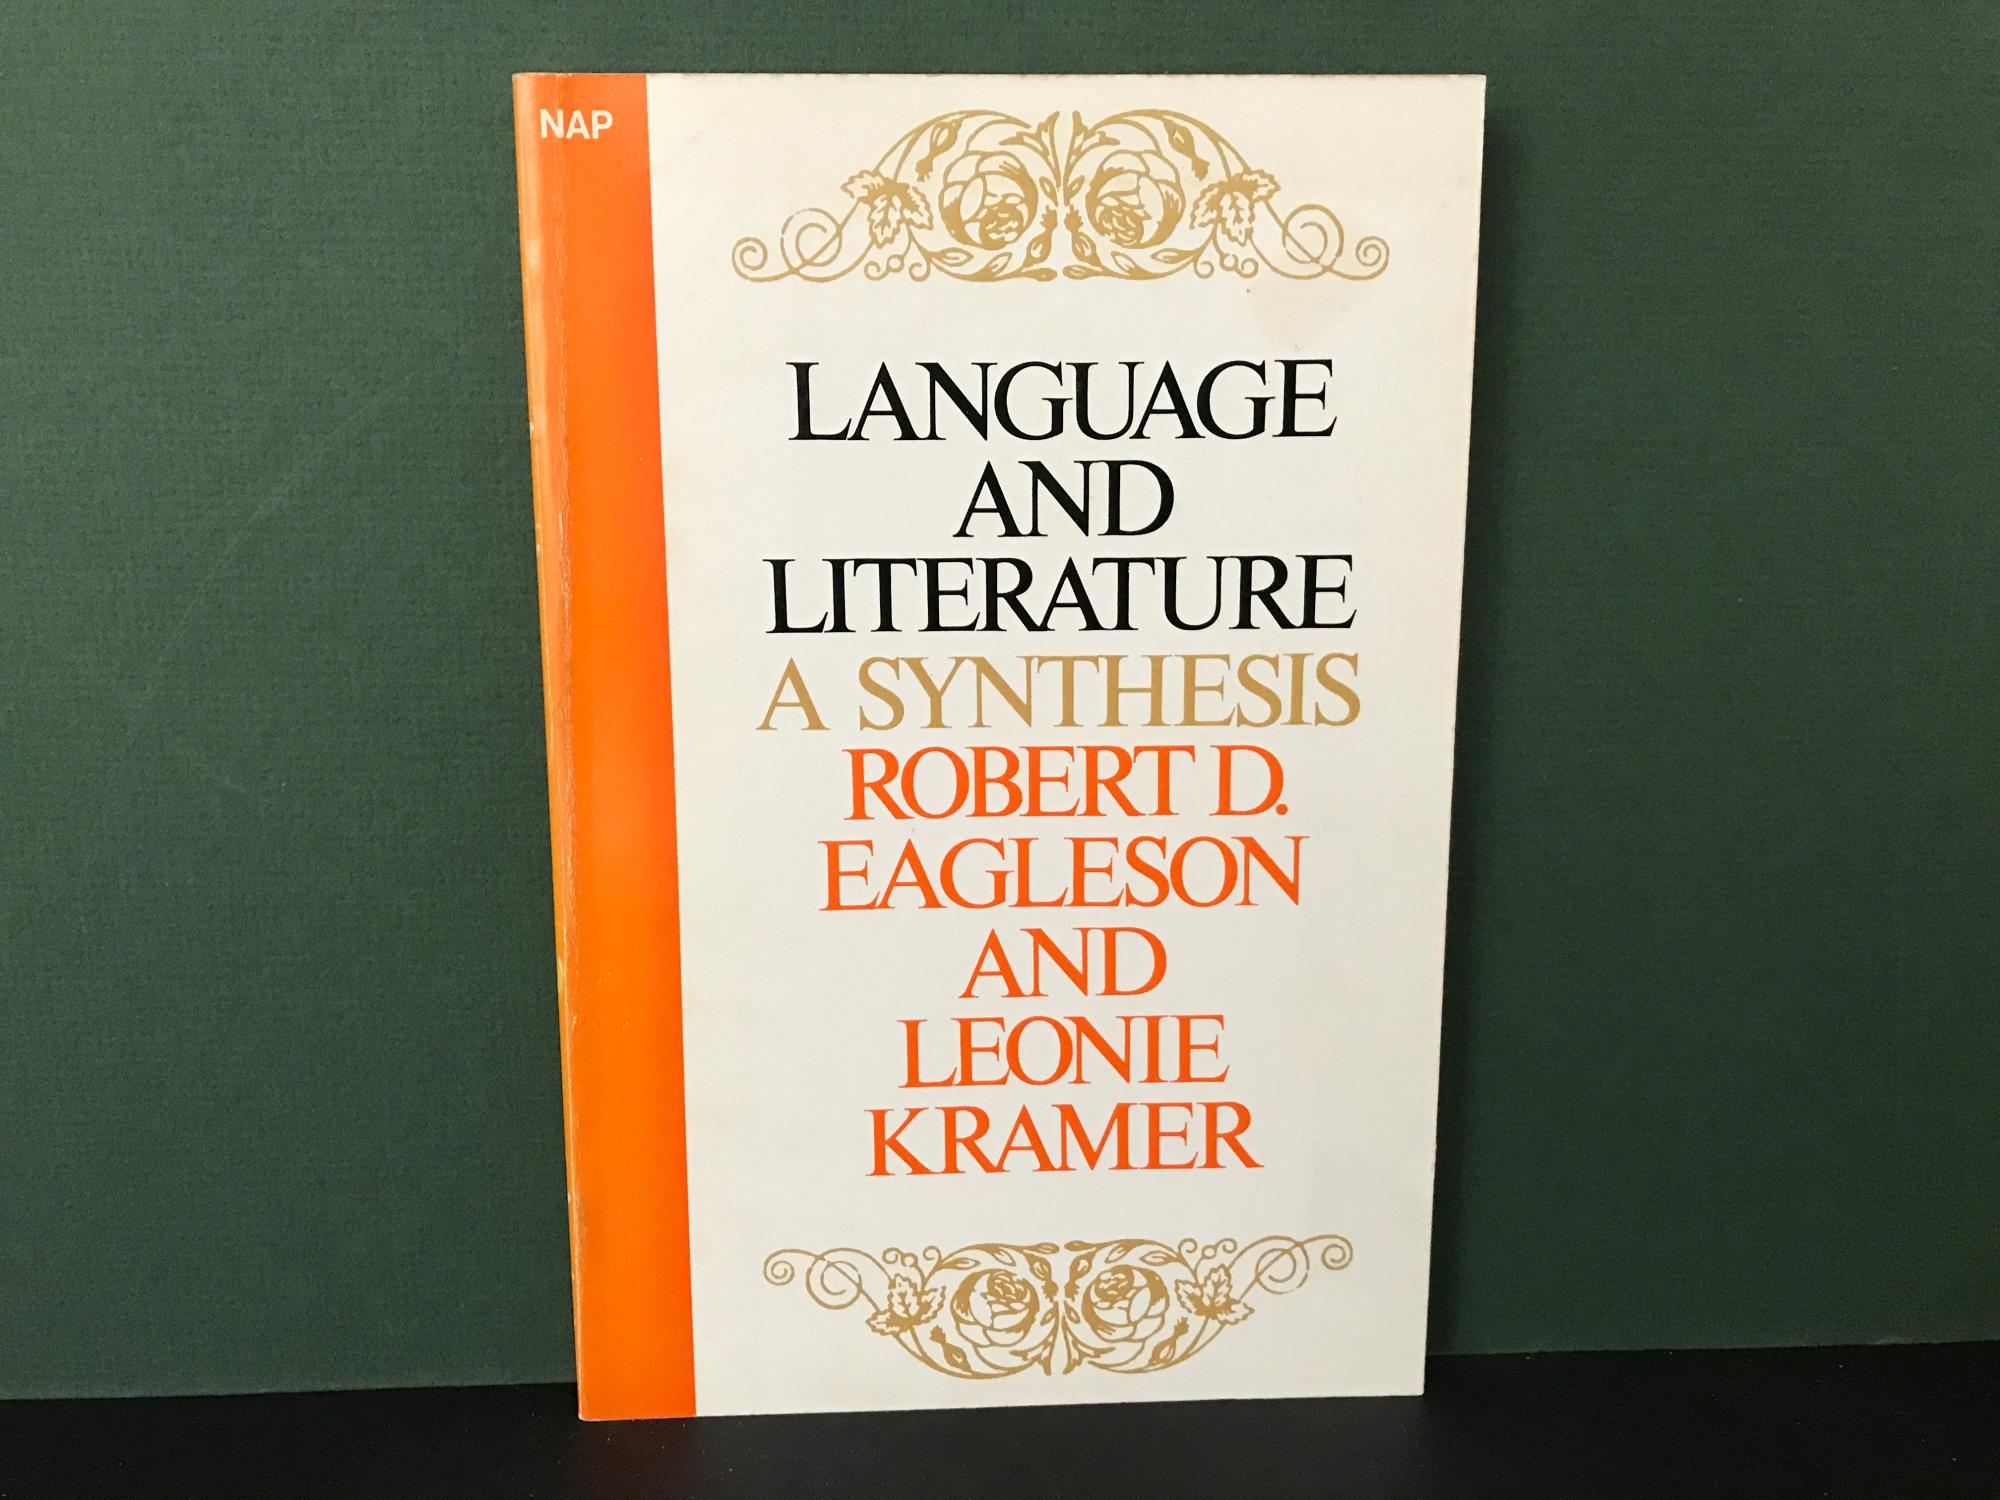 Language and Literature: A Synthesis - Eagleson, Robert D. & Leonie Kramer